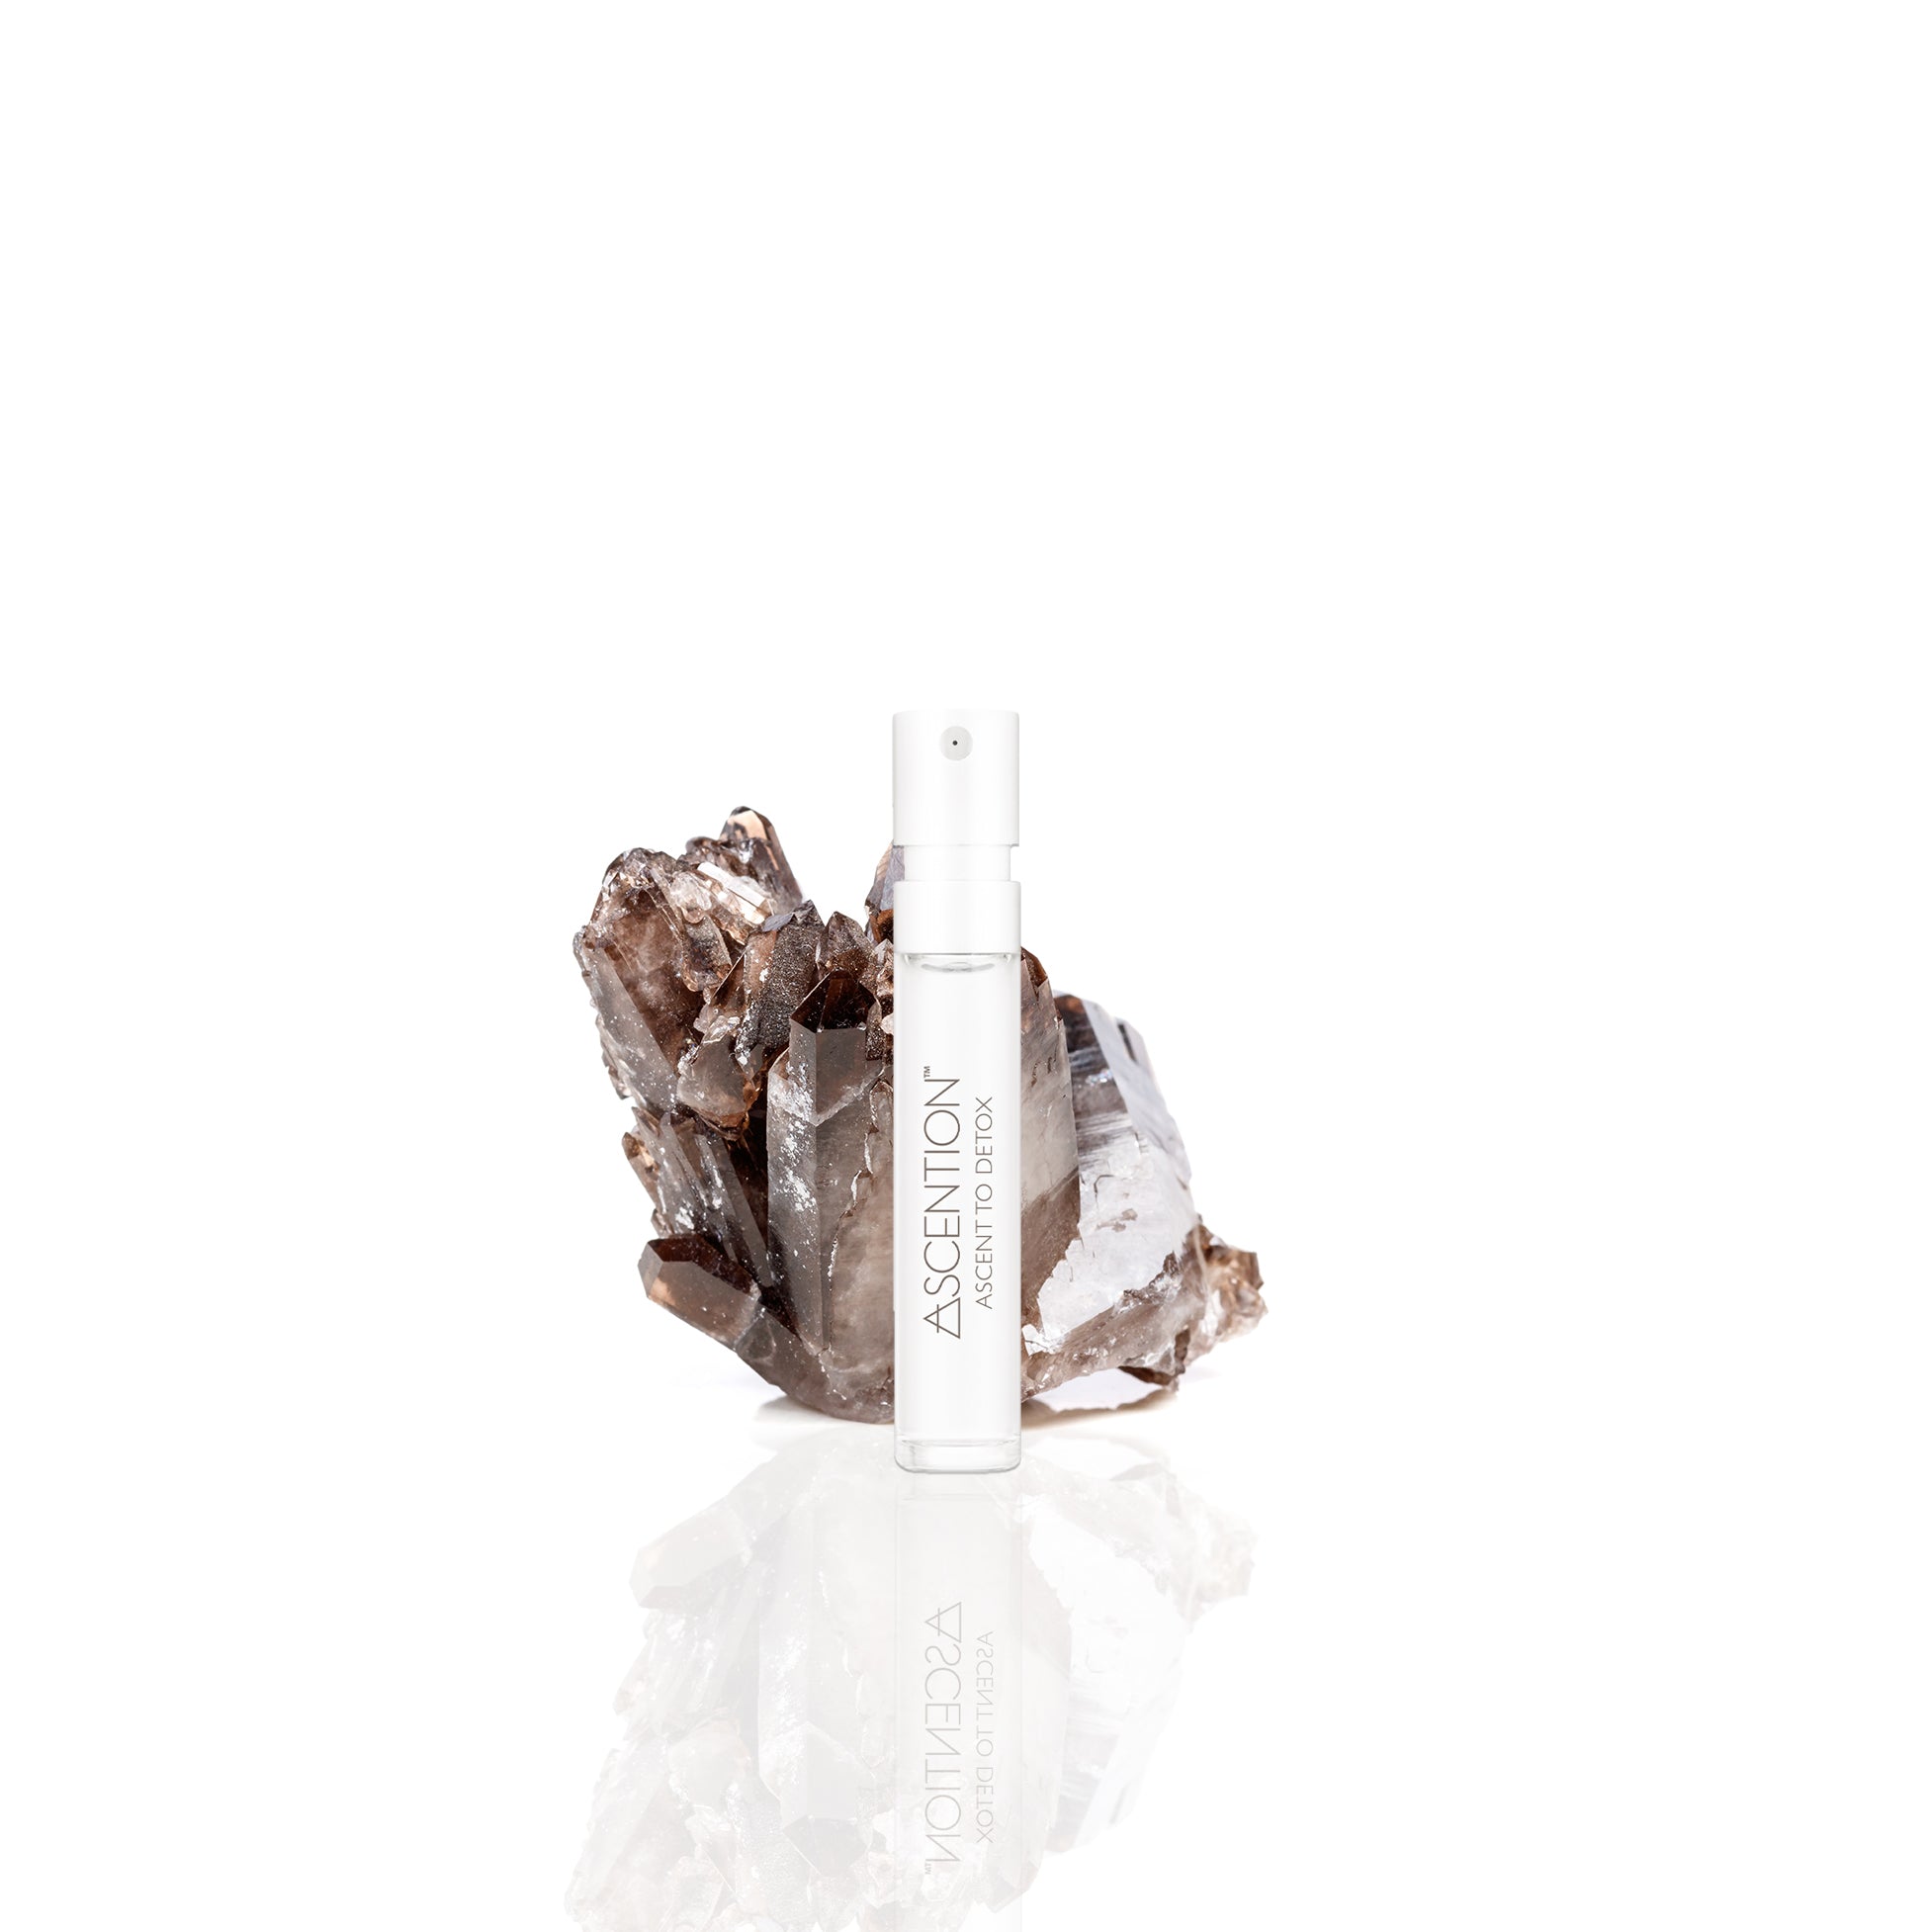 Ascent to Detox with Smoky Quartz crystal, scent with intent samples, don't just smell good, feel good. Discover, experience and manifest with scent resonates with you. Ascention is elevating the clean fragrance experience into wellness.